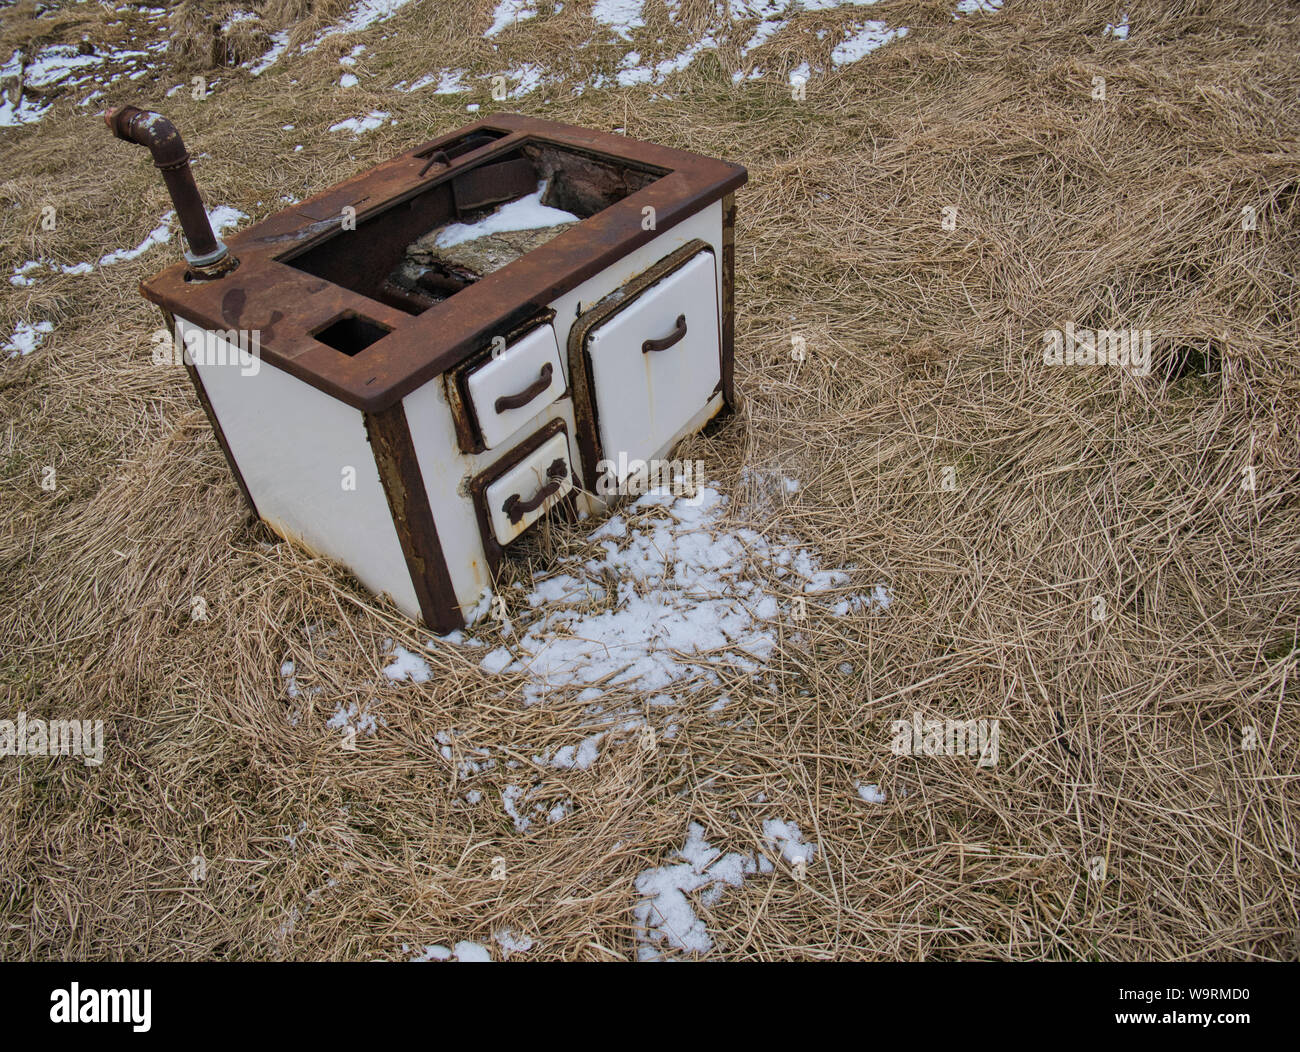 An antique kitchen stove outside on a meadow. Photo from April in Iceland Stock Photo